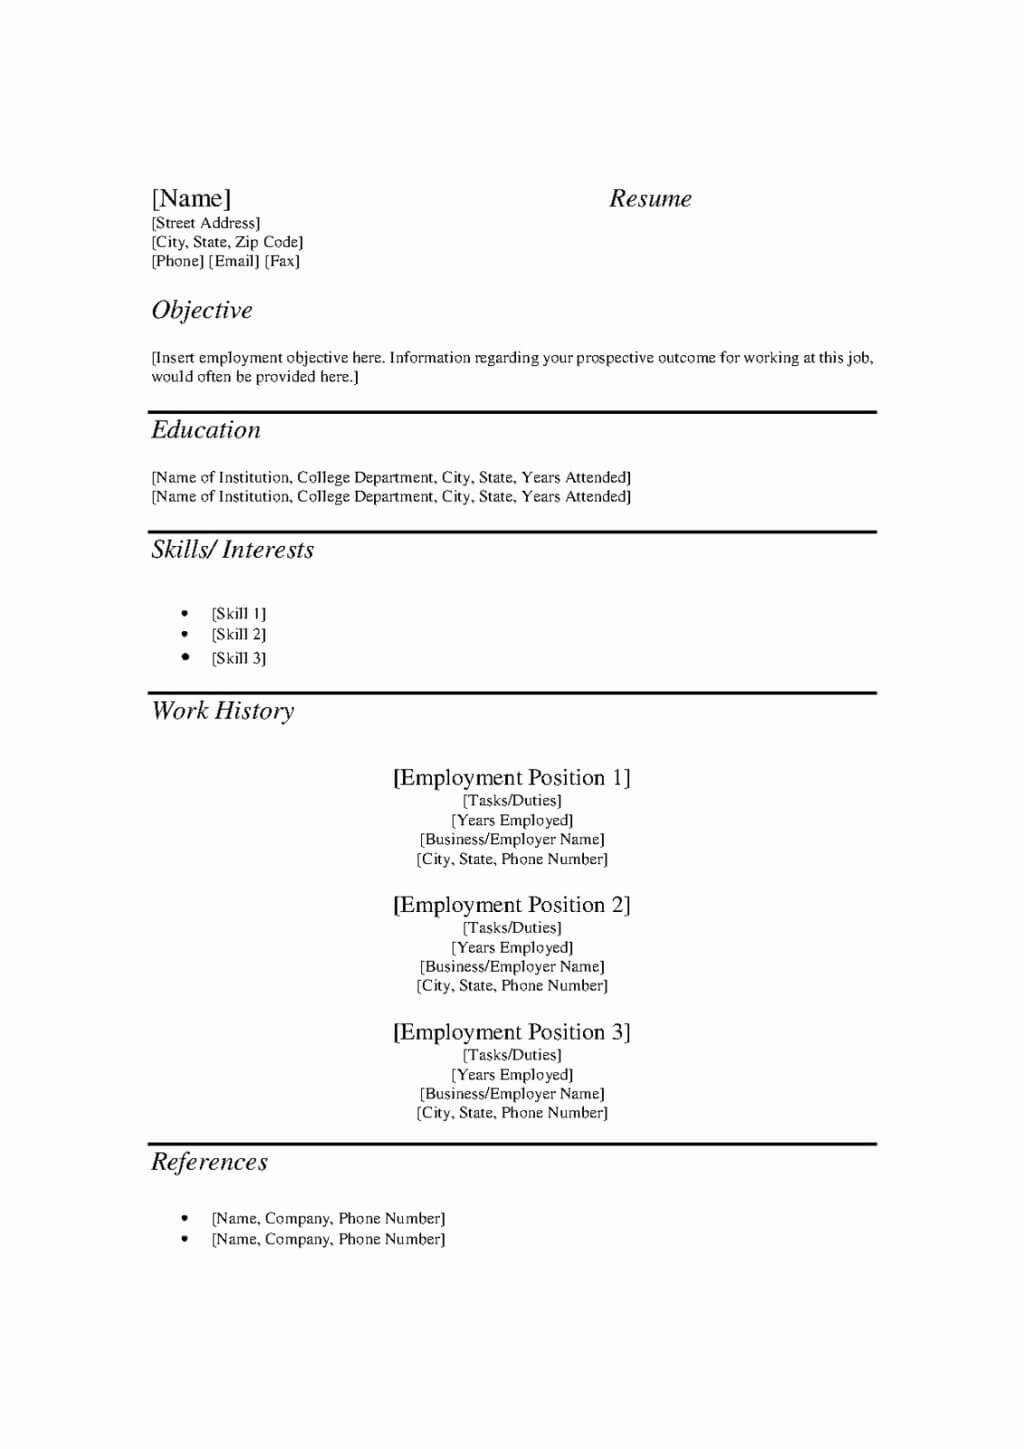 Free Blank Resume Templates For Microsoft Word – Yatay Throughout Blank Resume Templates For Microsoft Word